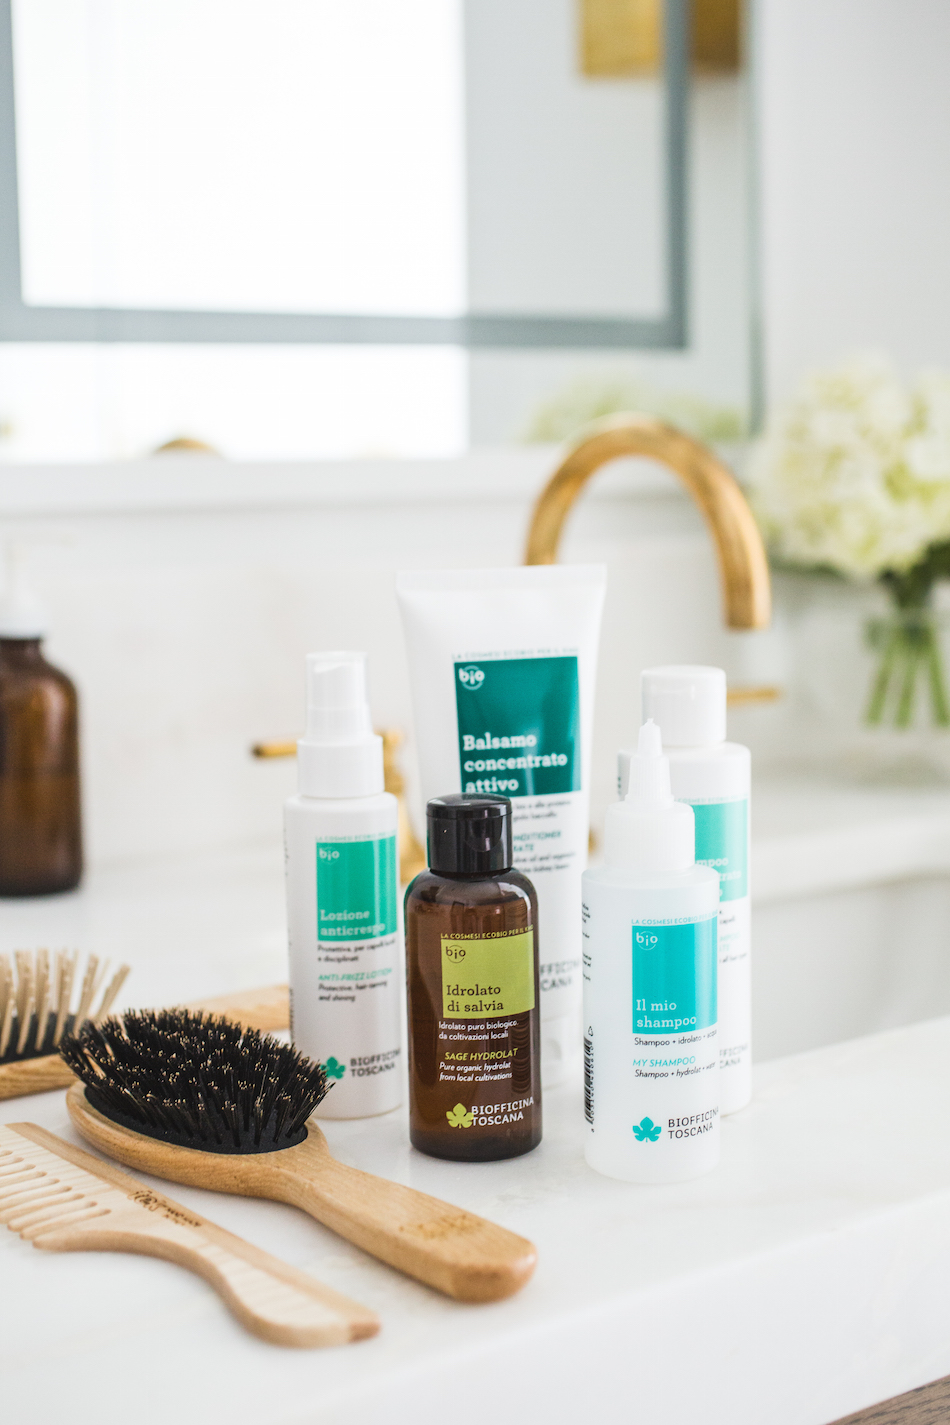 the best nontoxic haircare lines on barebeauty.com